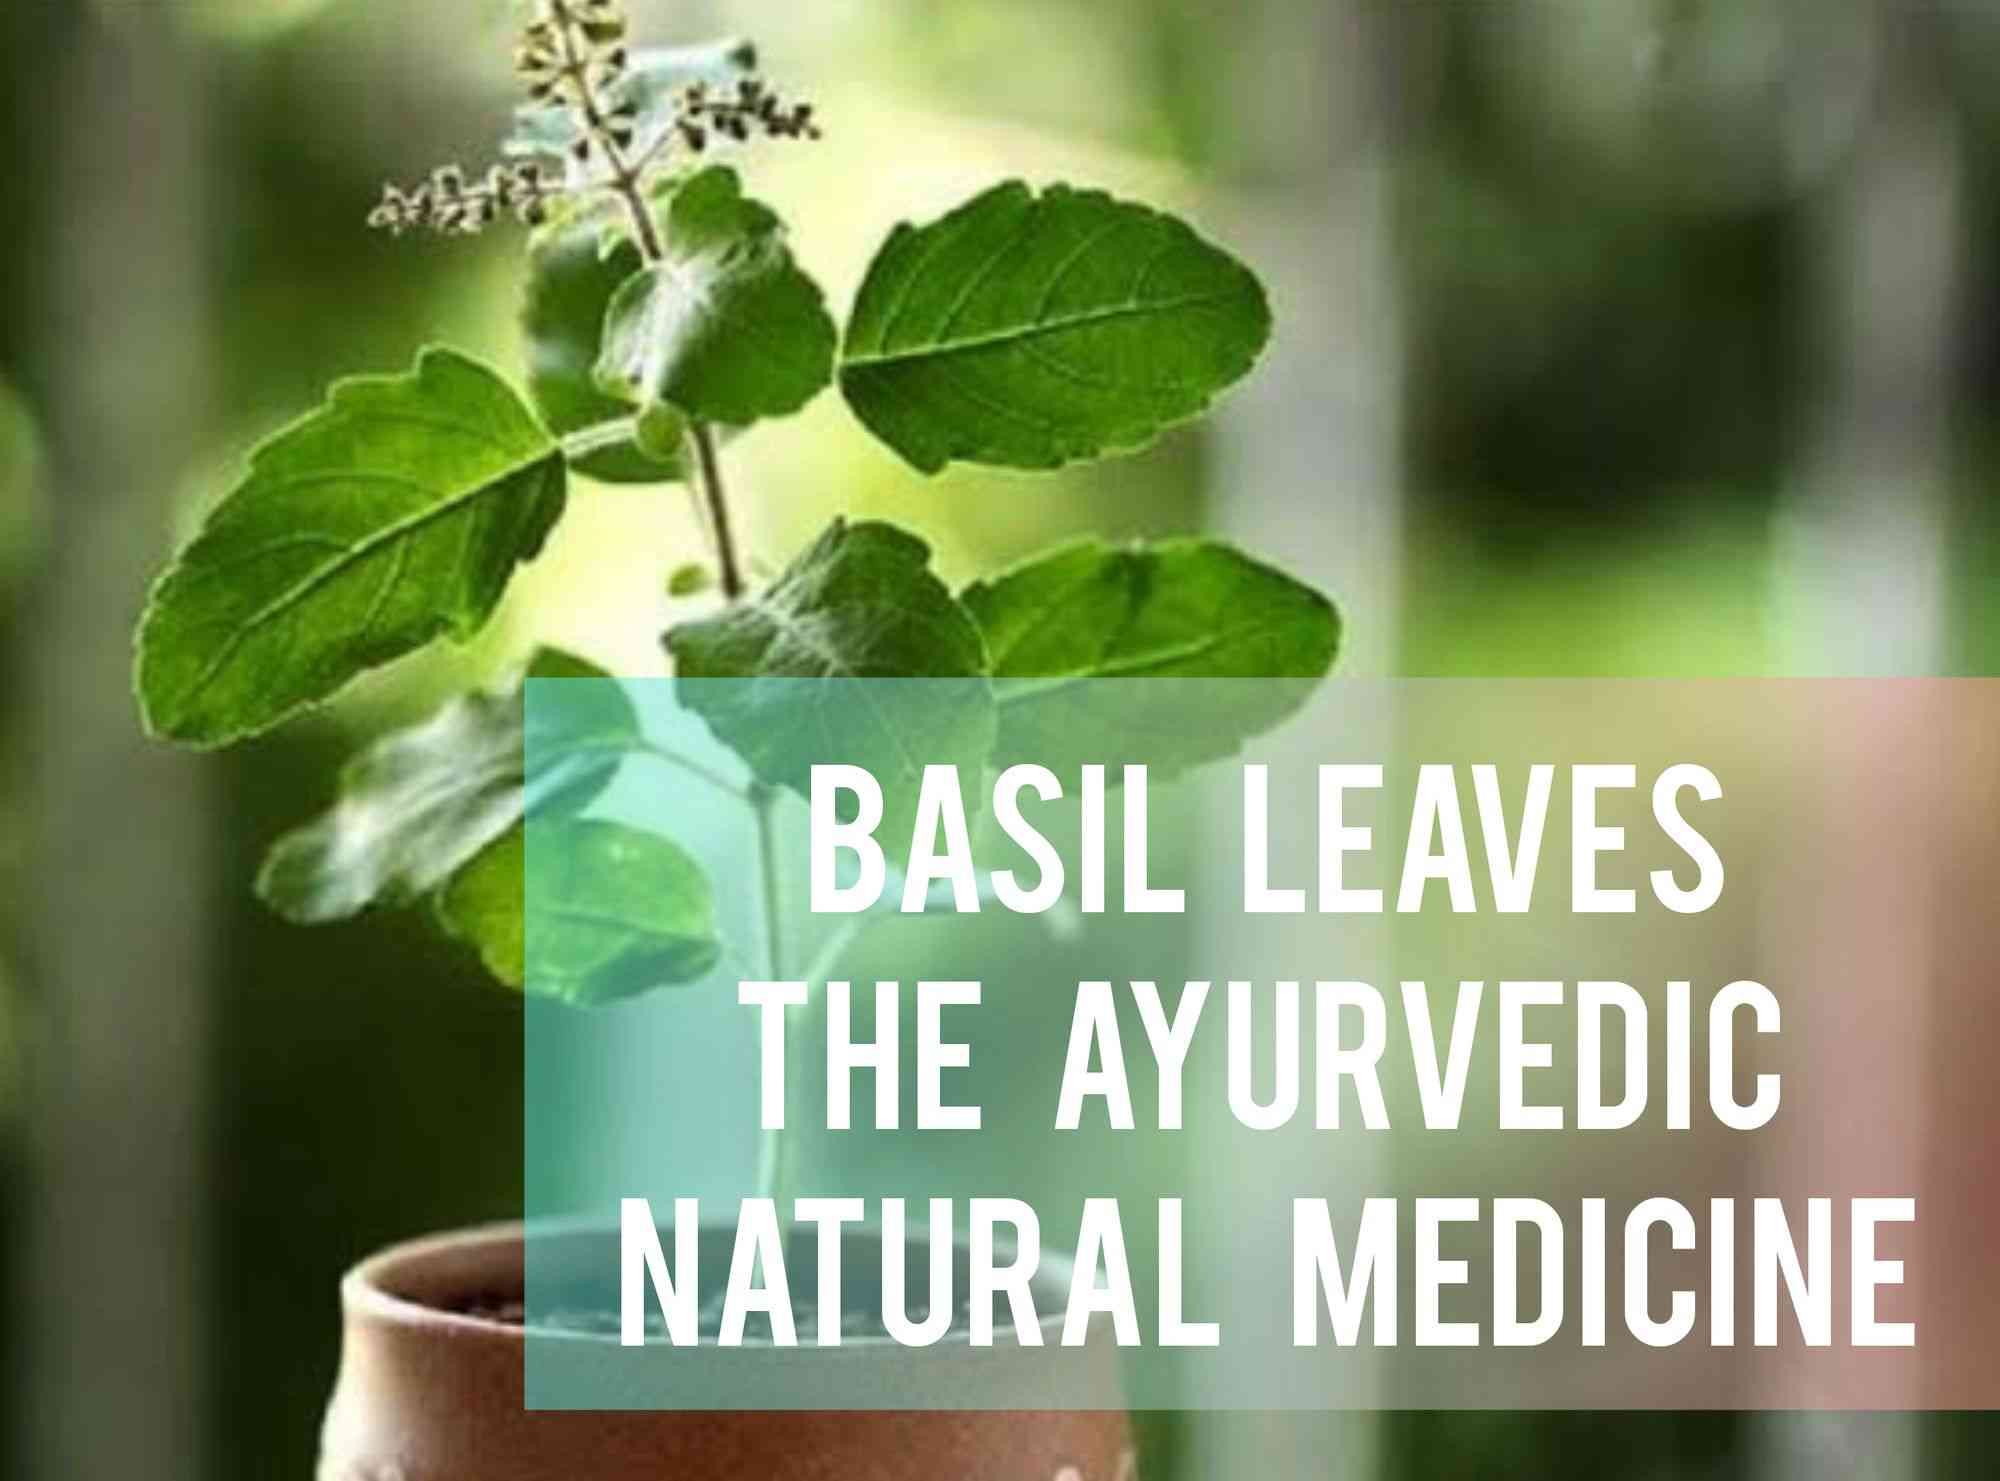 Basil Leaves: One of The Best Ayurvedic Natural Medicines